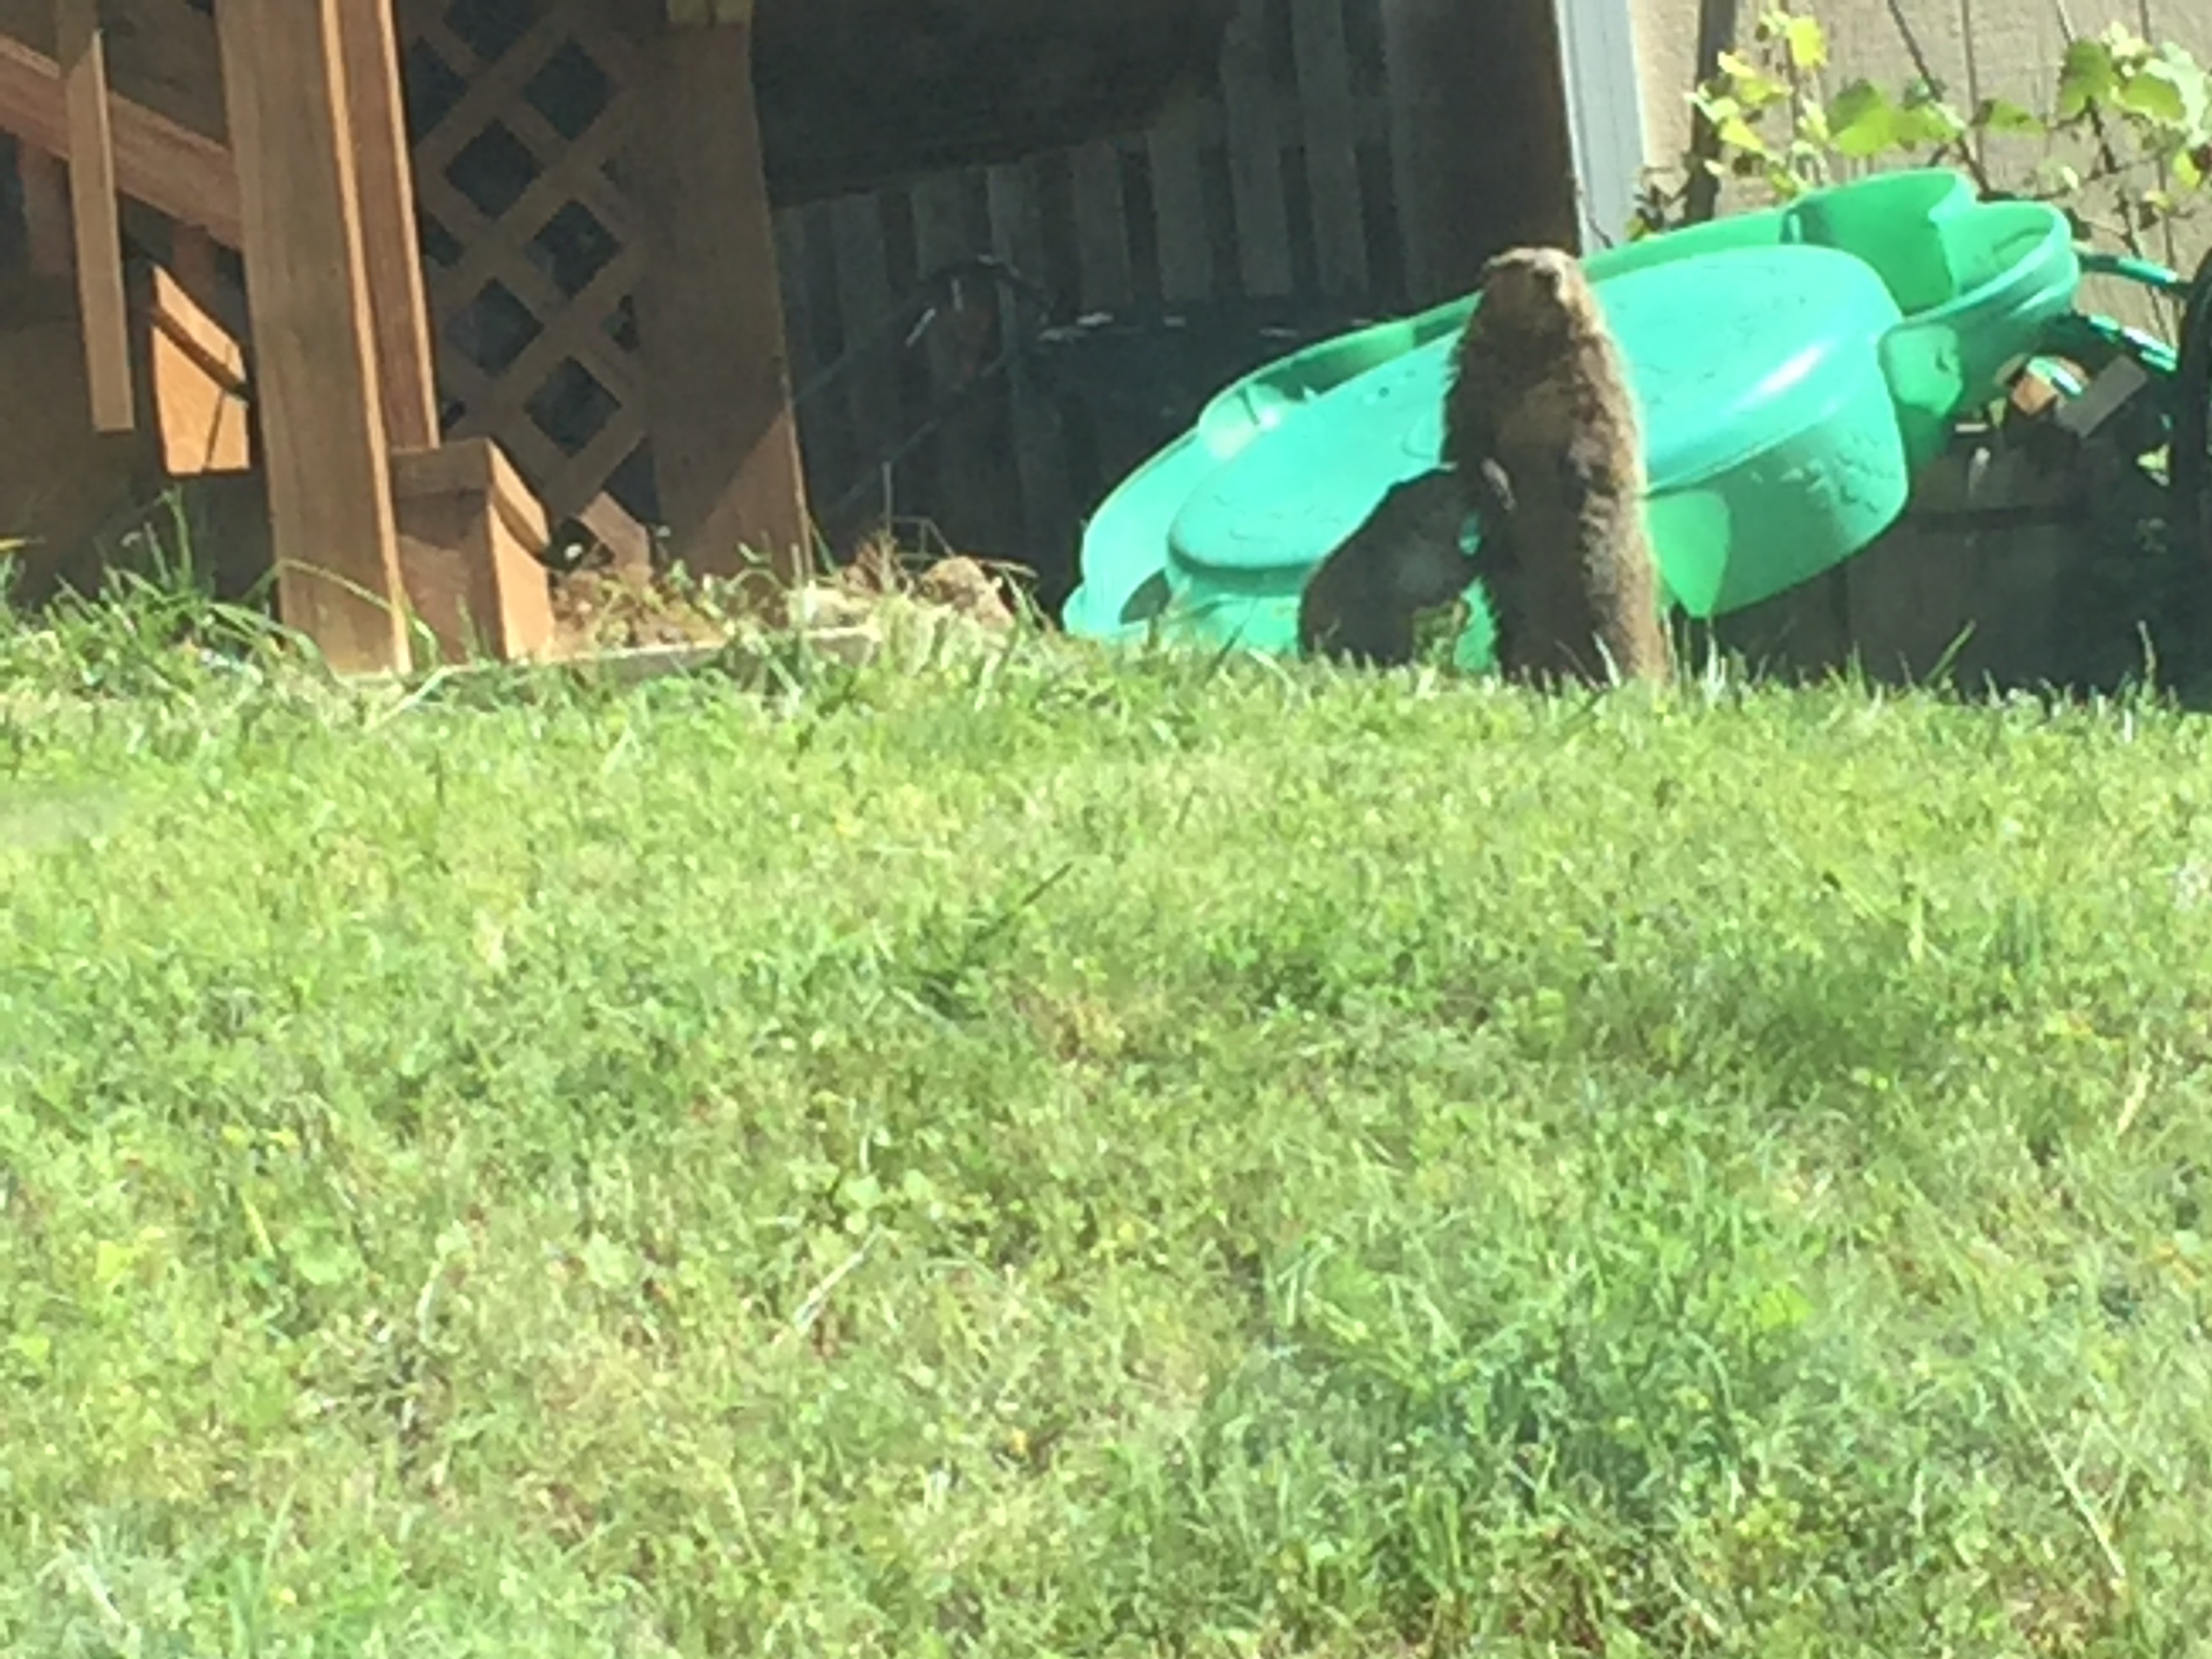 Photo of groundhog and groundhog baby in a yard with green grass and a turtle-shaped toddler pool behind them.